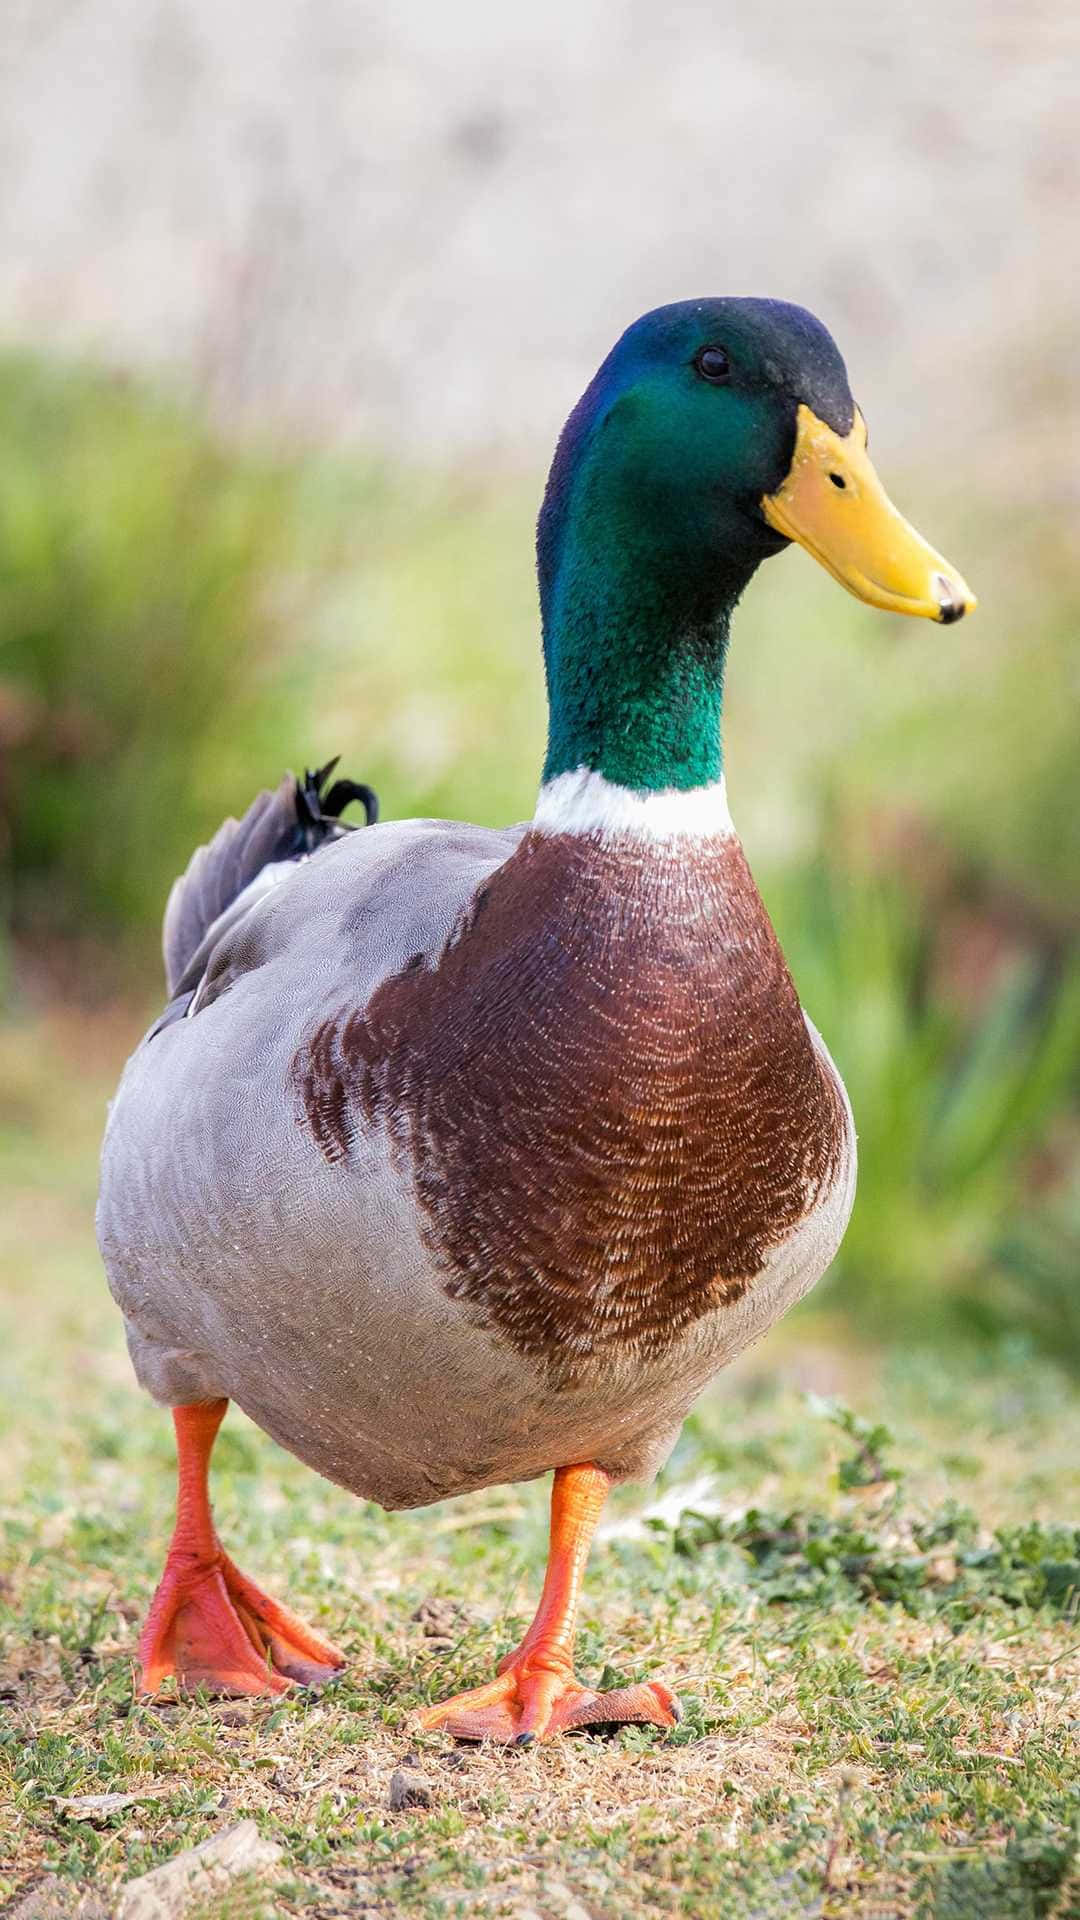 A Duck Standing On The Ground